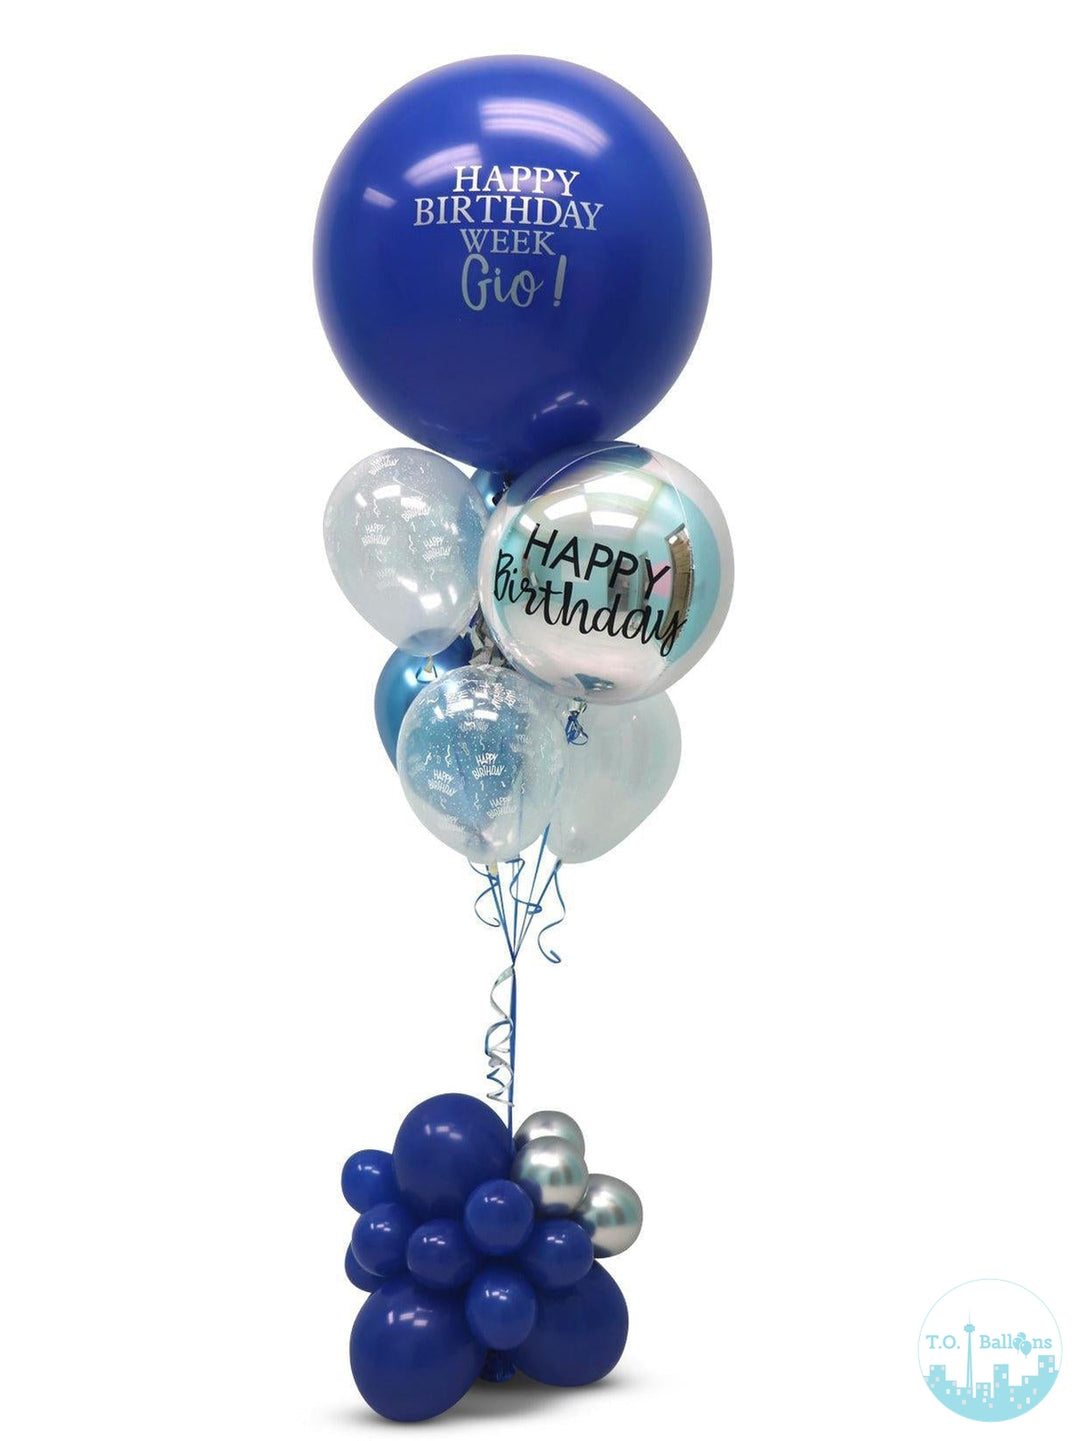 3ft Personalized Balloon Bouquet Balloons T.O. Balloons 